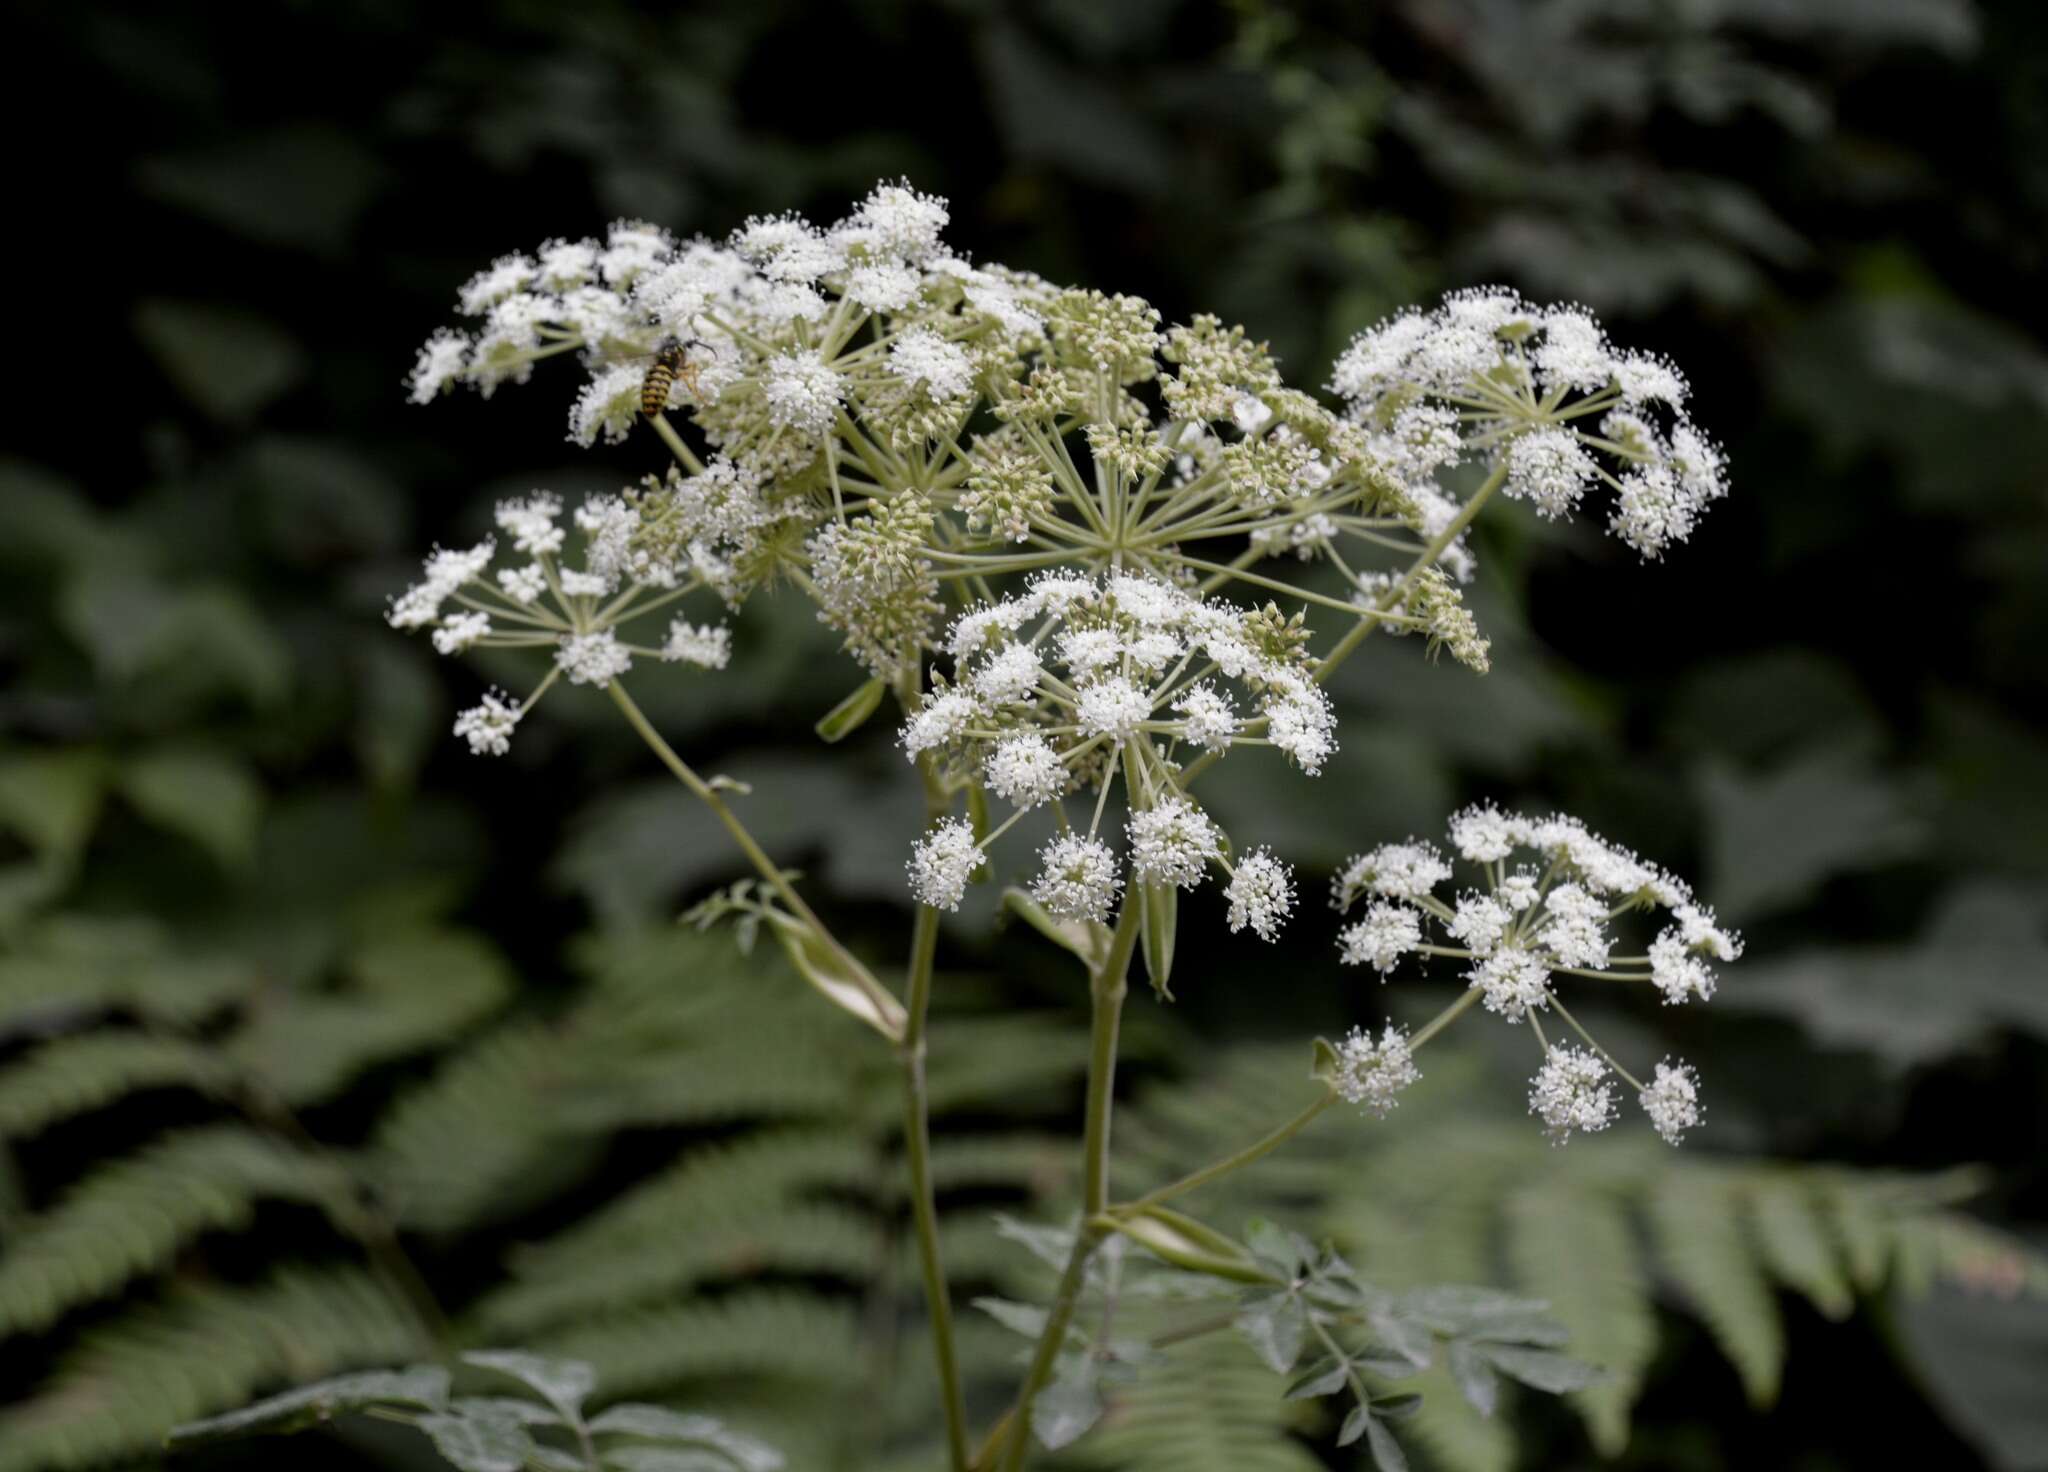 Image of hairy angelica